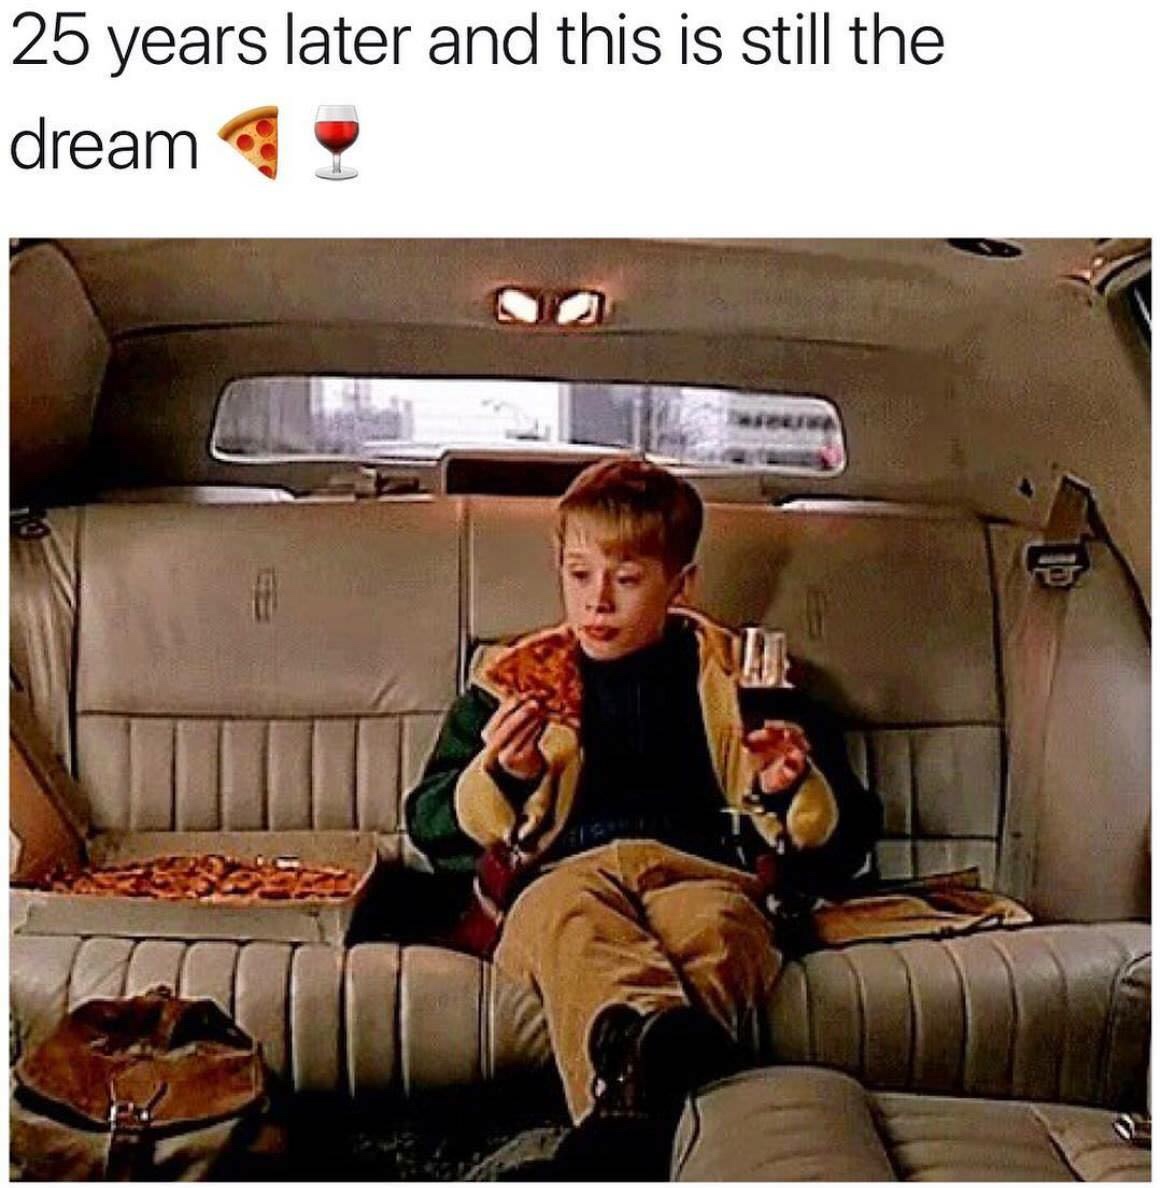 memes - home alone pizza - 25 years later and this is still the dream